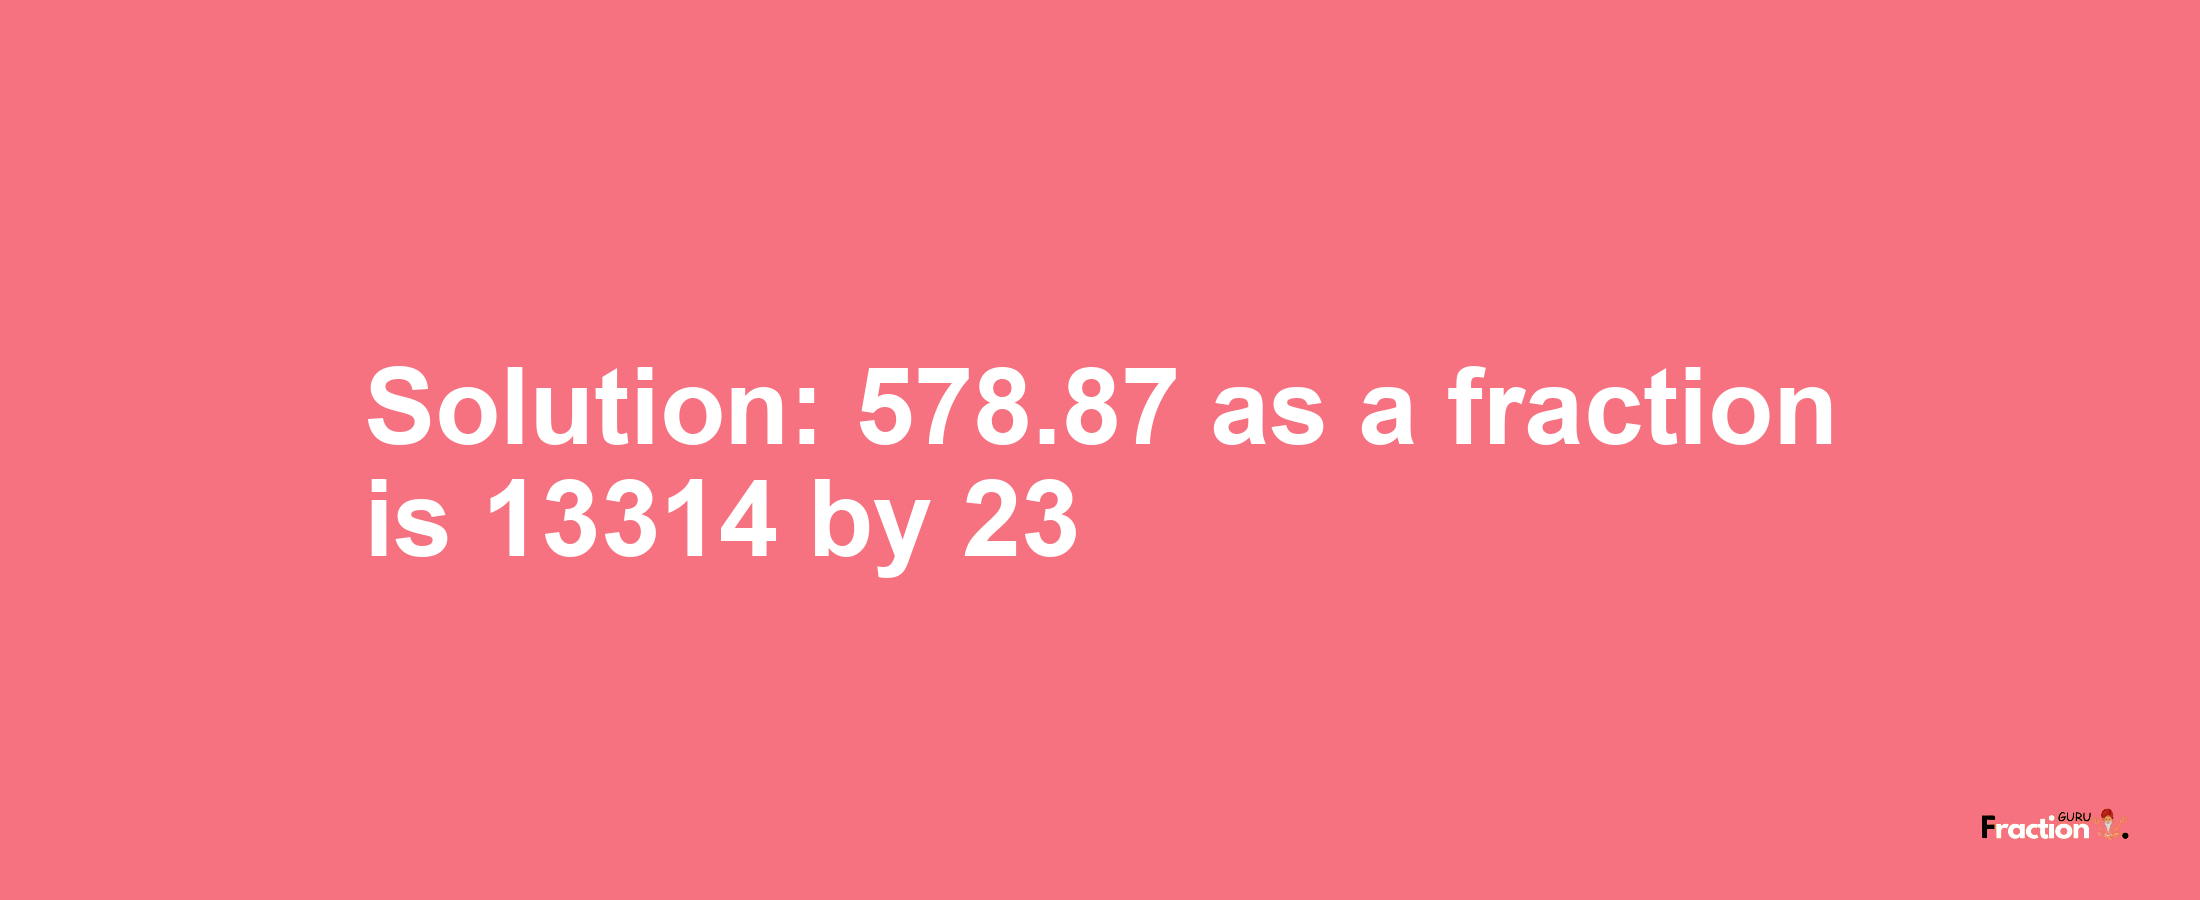 Solution:578.87 as a fraction is 13314/23